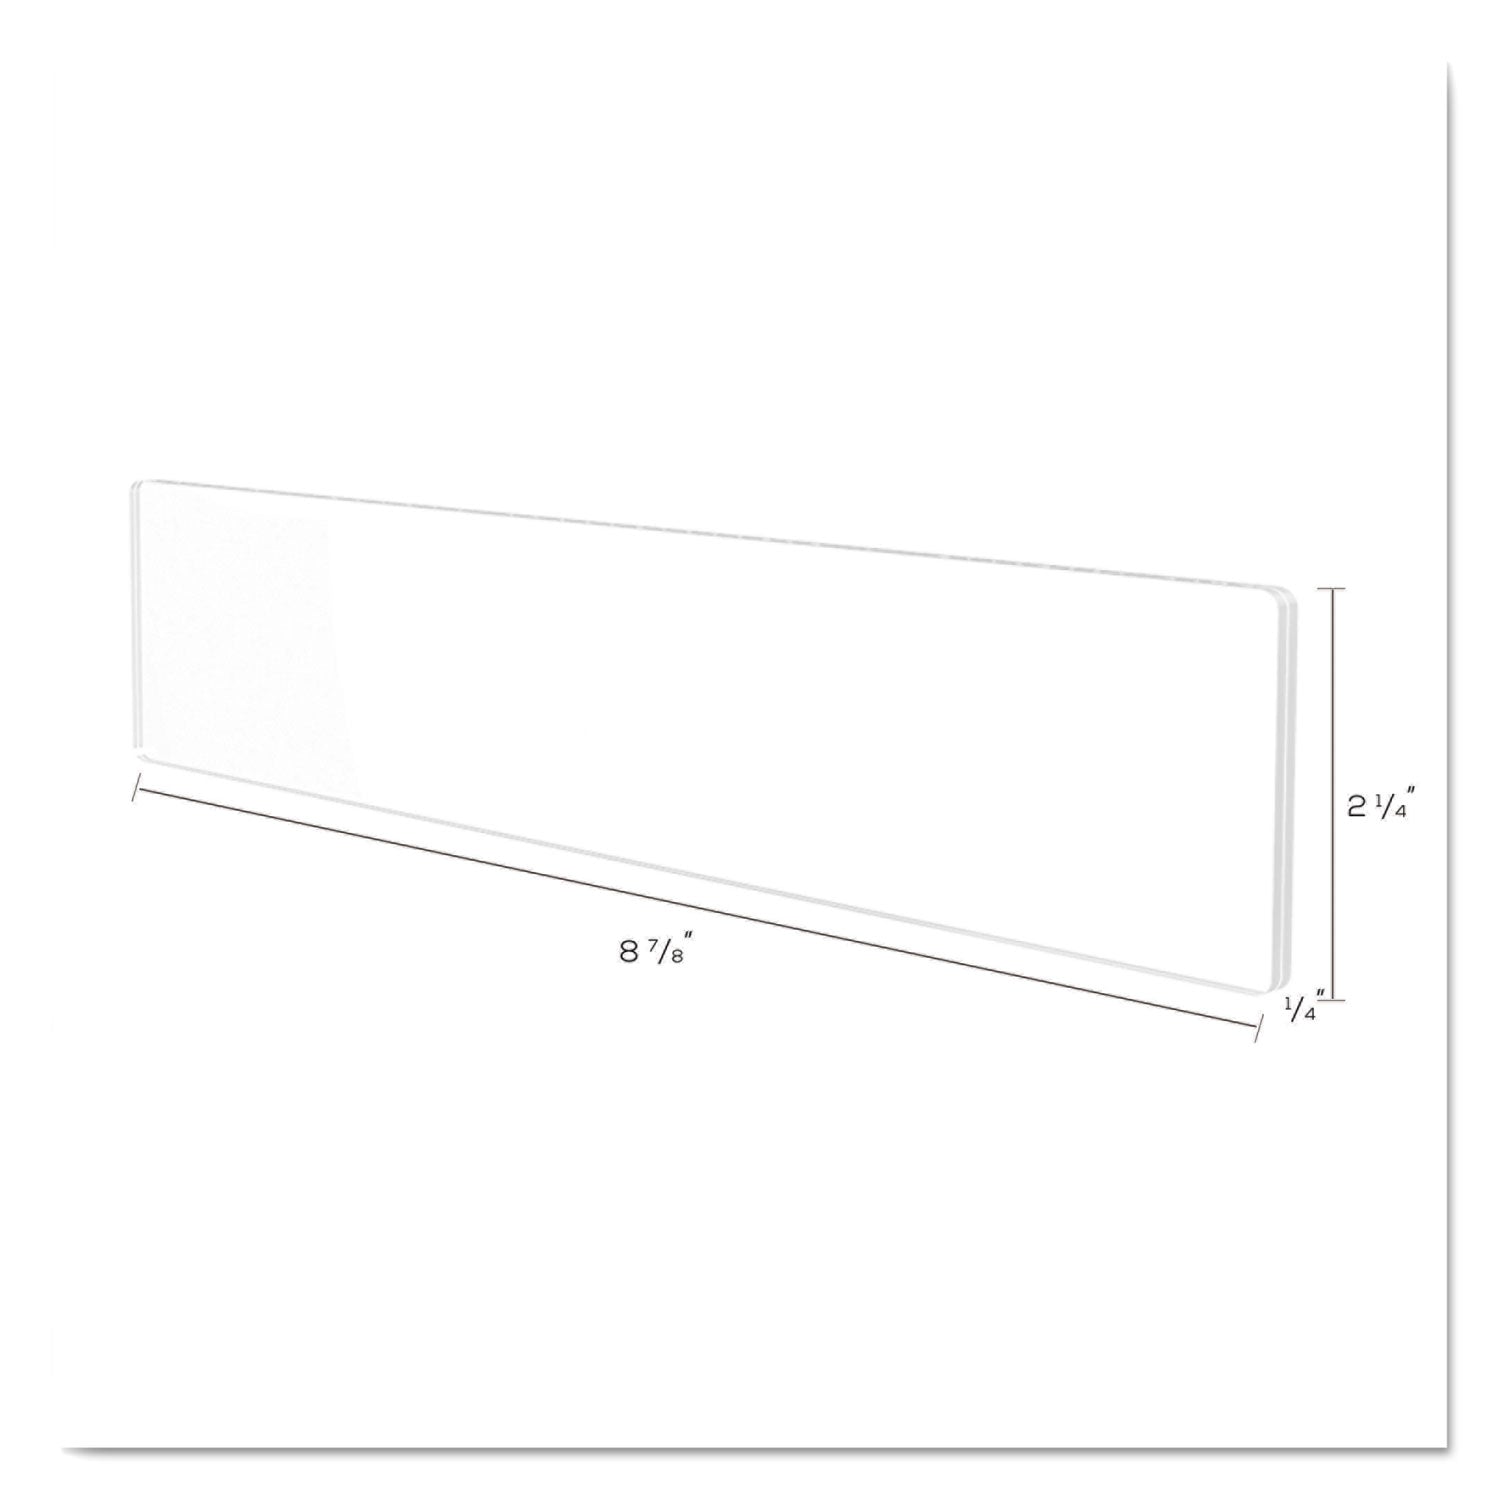 Superior Image Cubicle Nameplate Sign Holder, 8.5 x 2 Insert, Clear - 